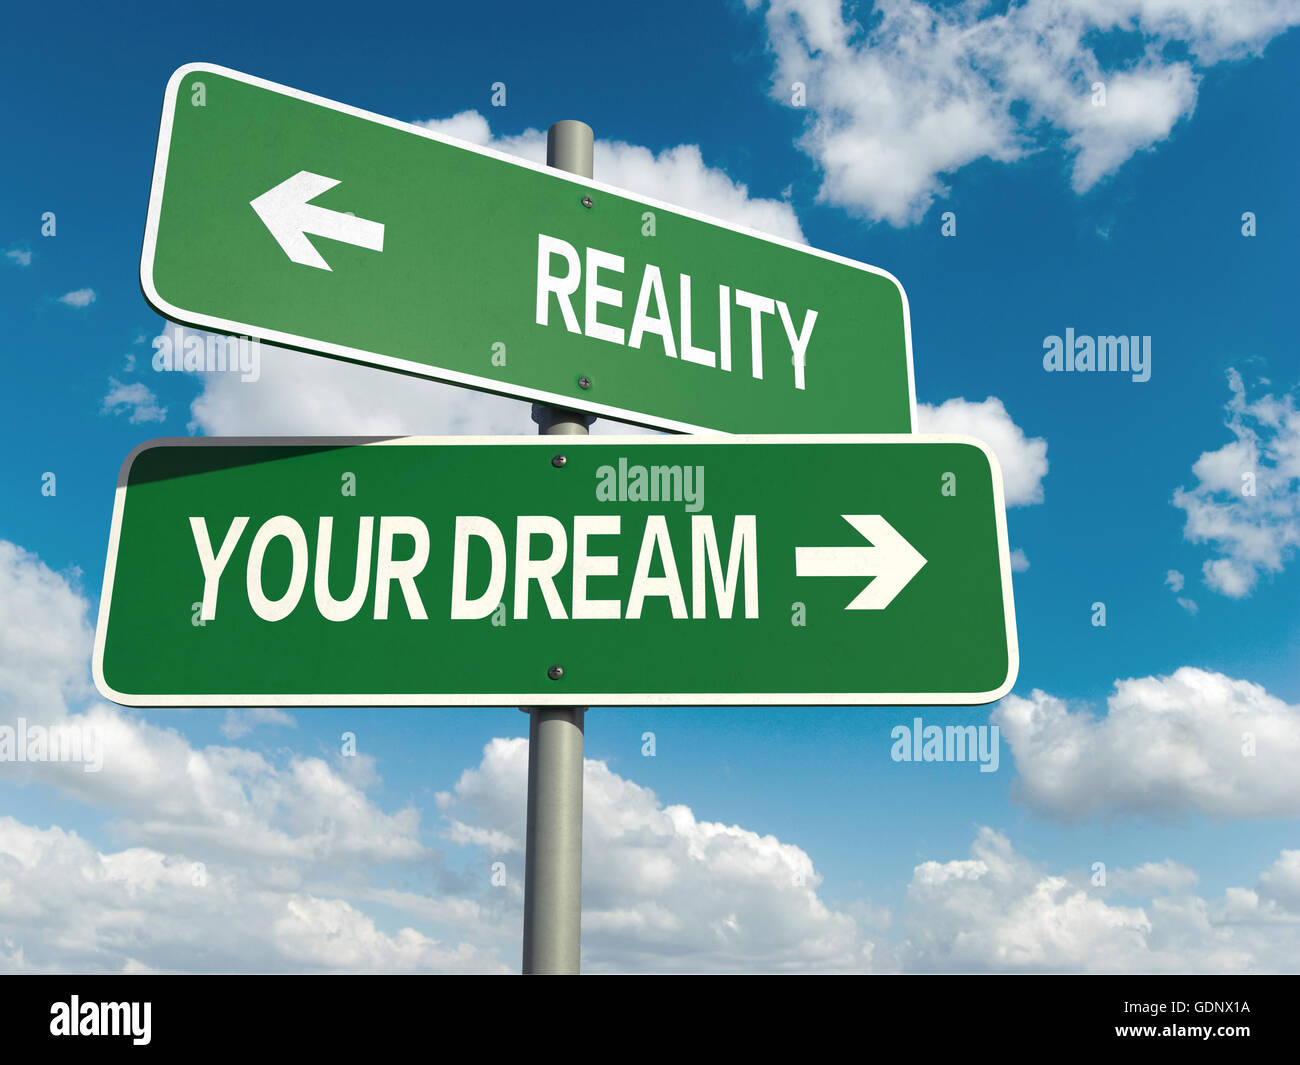 A road sign with reality dream words on sky background Stock Photo